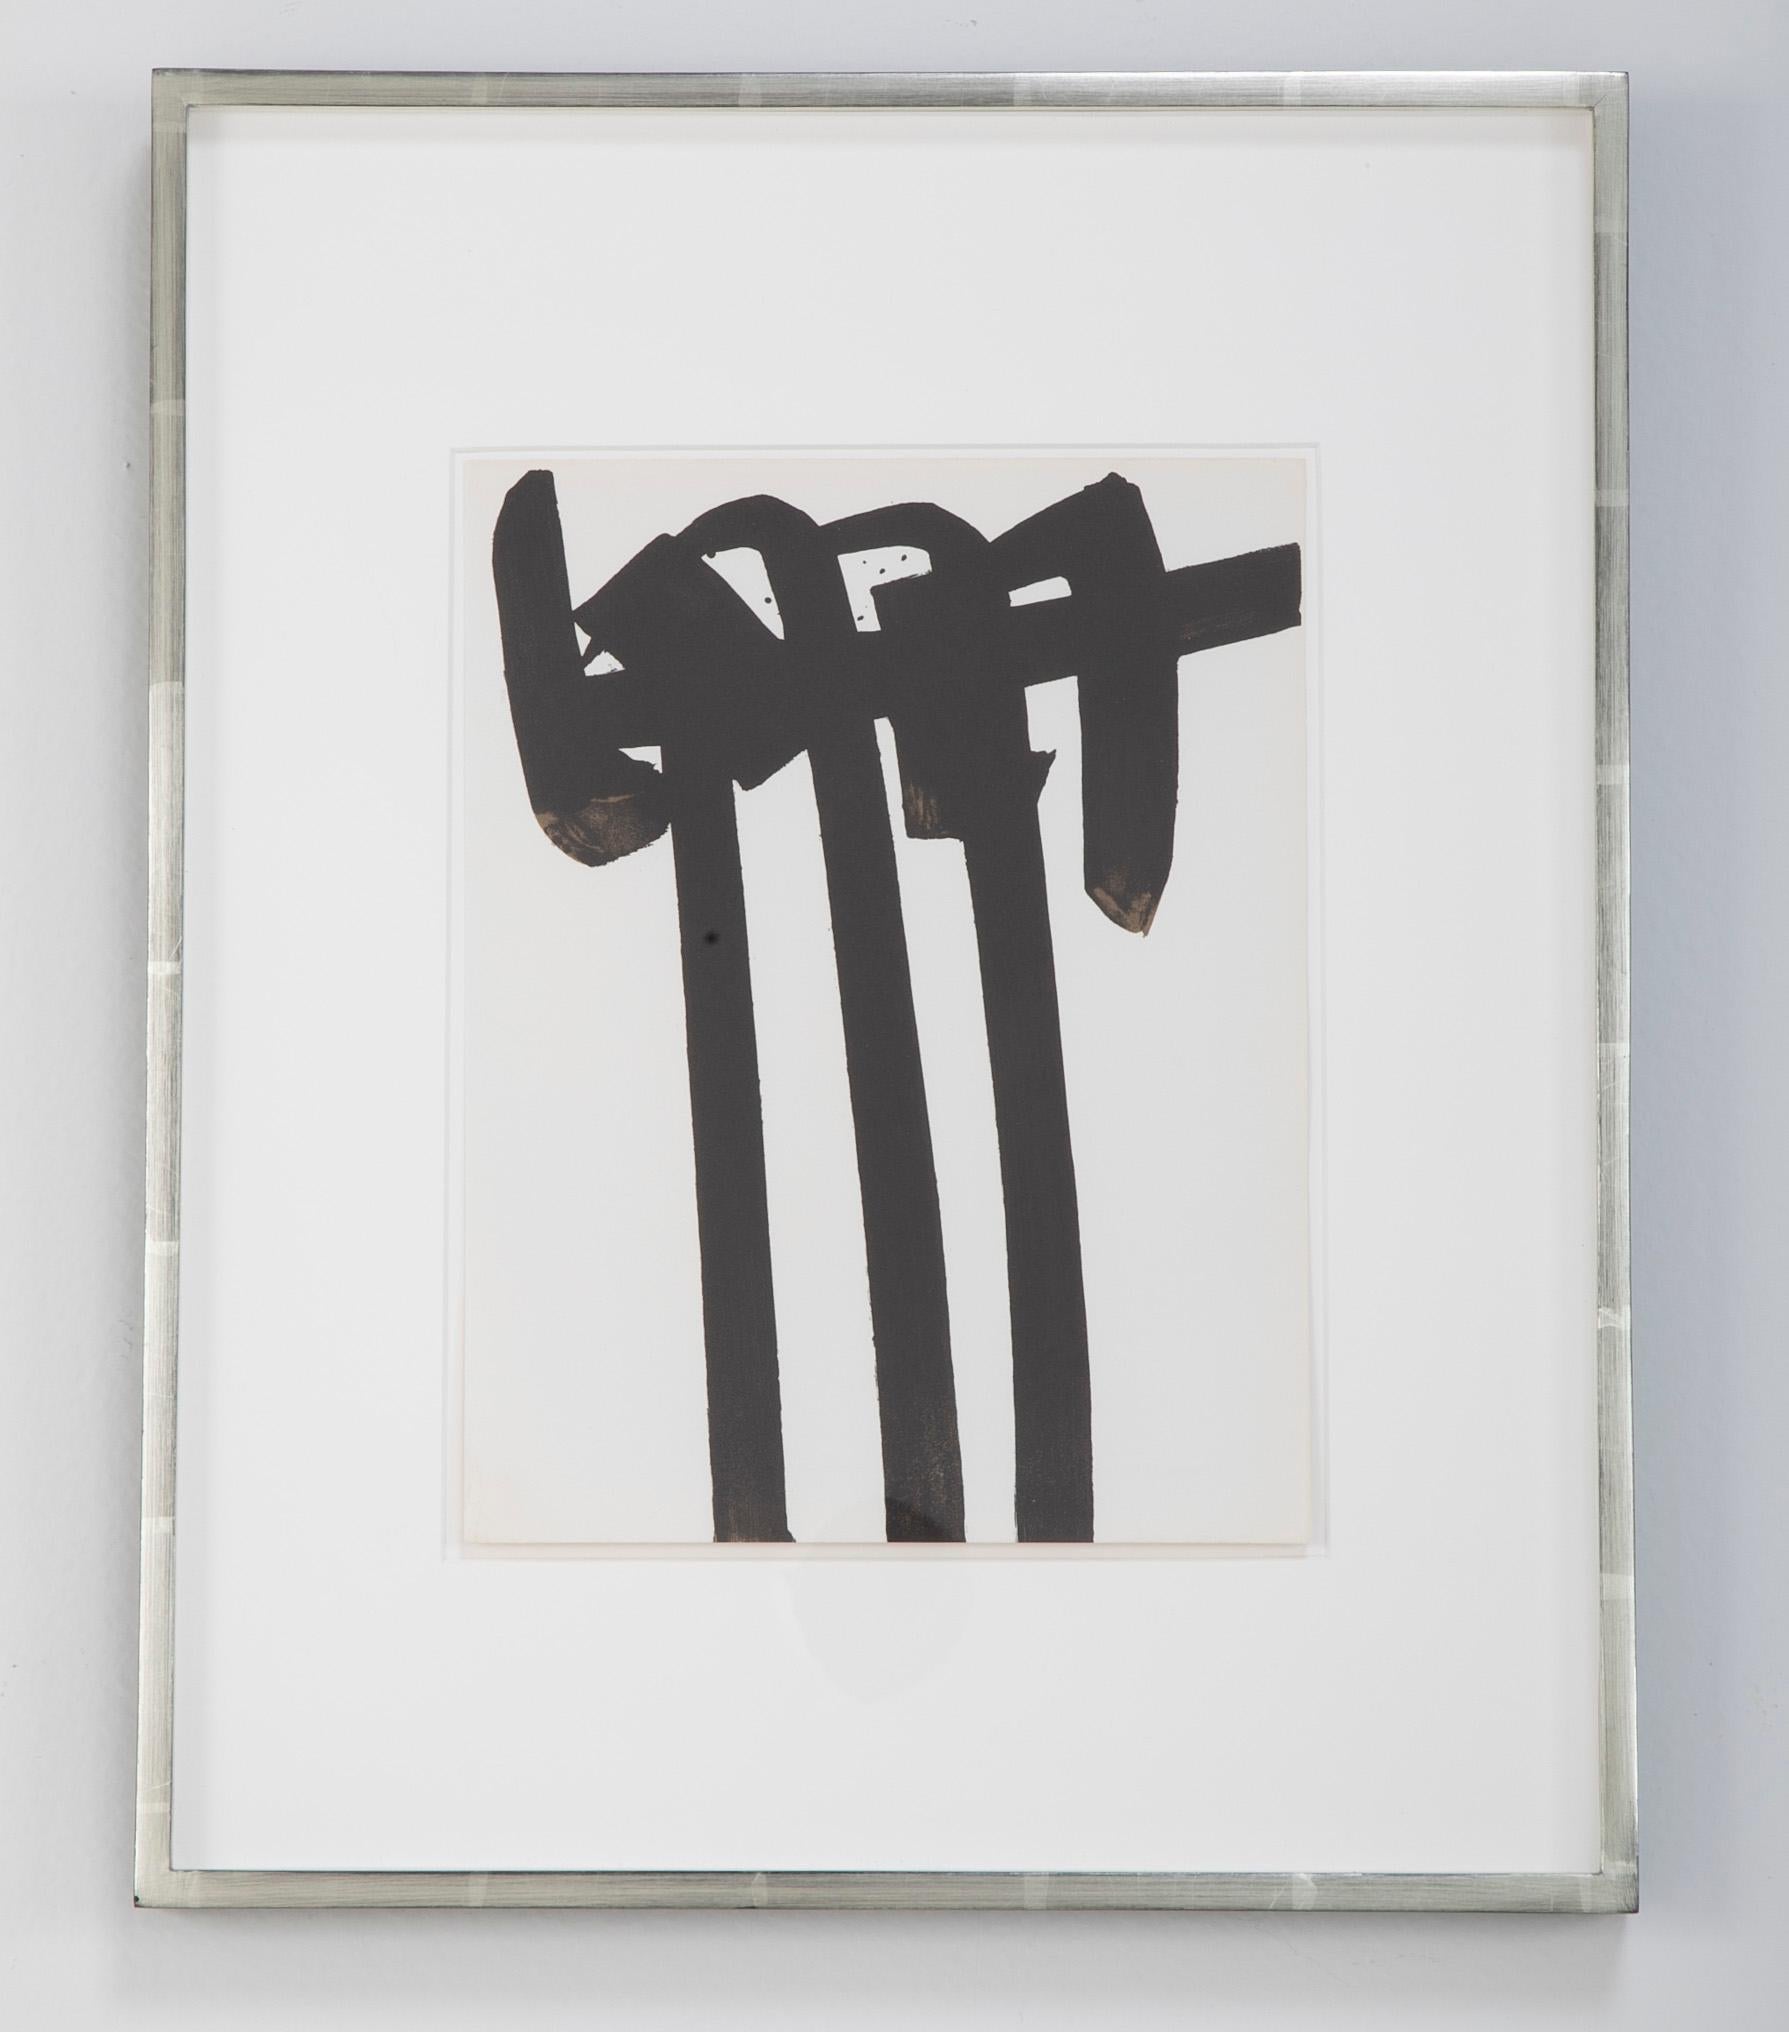 Pierre Soulages- Litho #34 from XXeme Sieclen signed and titled in pencil on reverse. Lithograph in colors. Sheet size. 15 1/8 x 12 1/4''